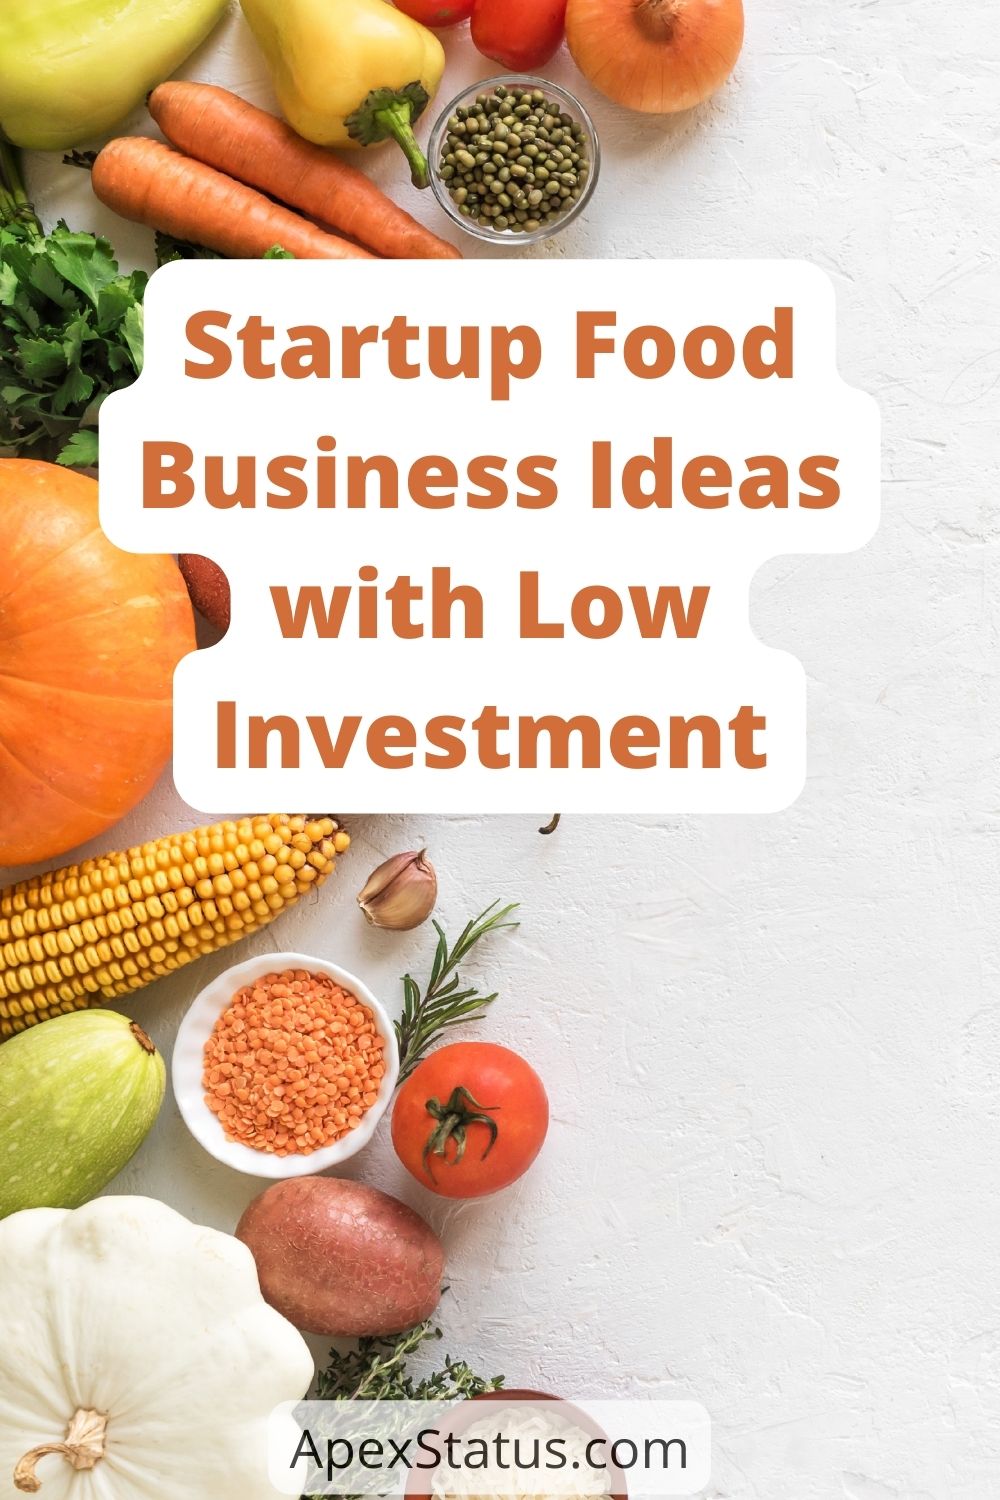 What makes one food business more profitable than another